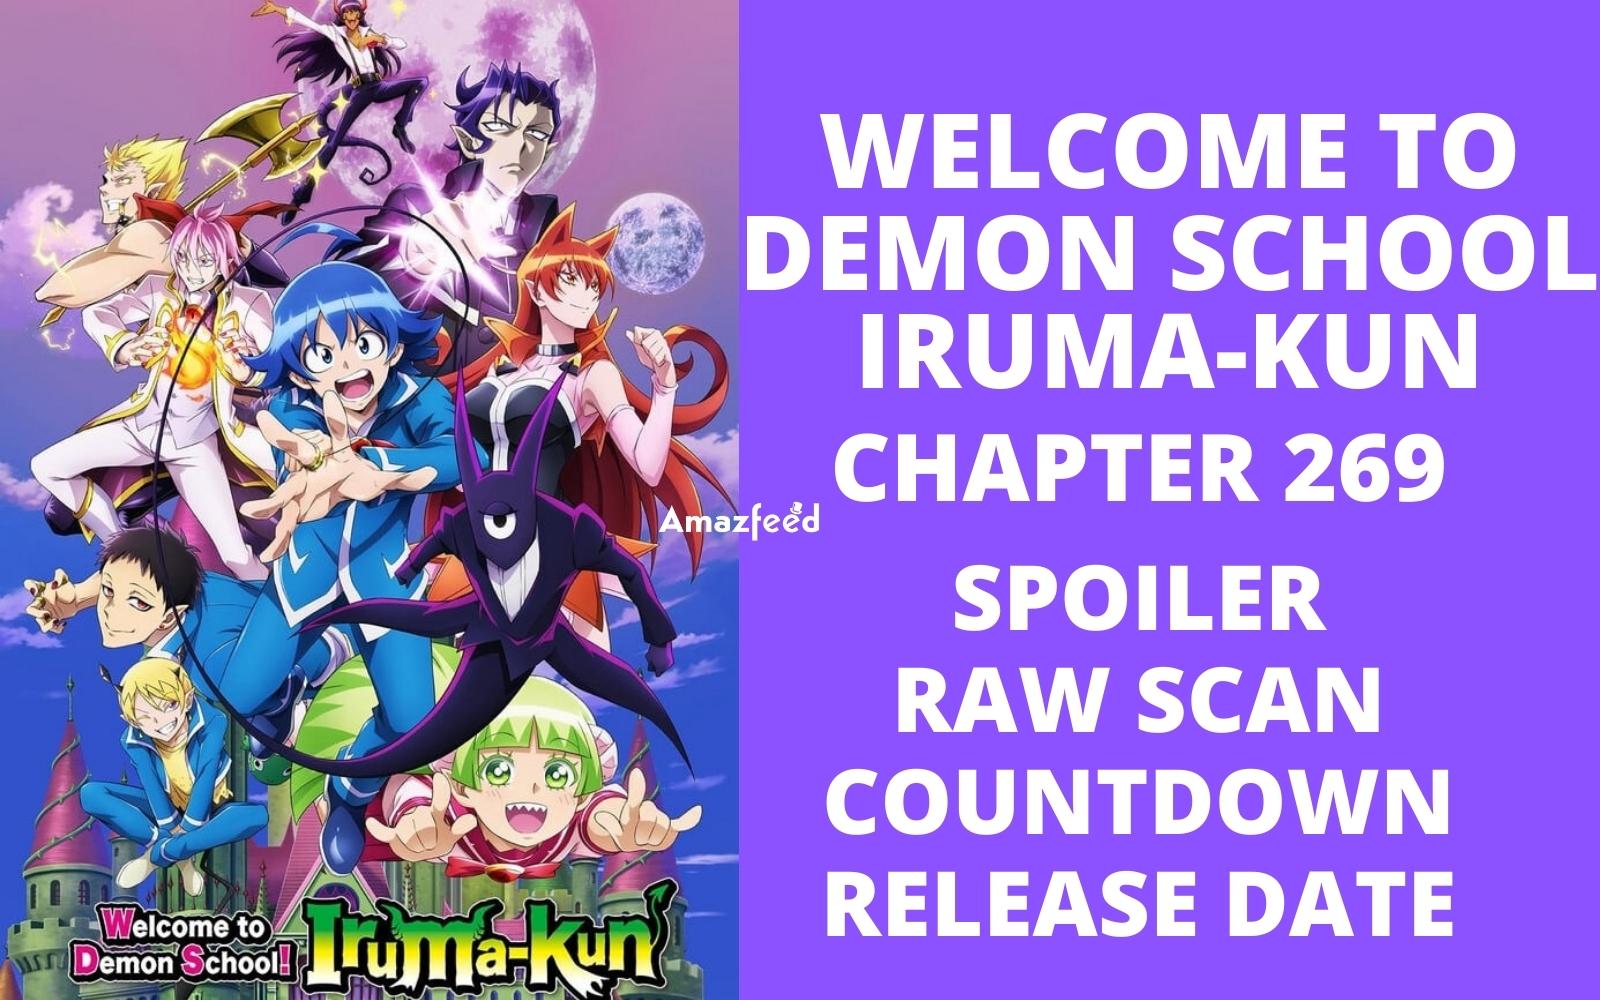 Welcome To Demon School Iruma-Kun Chapter 269 Spoiler, Release Date - Everything we know so far